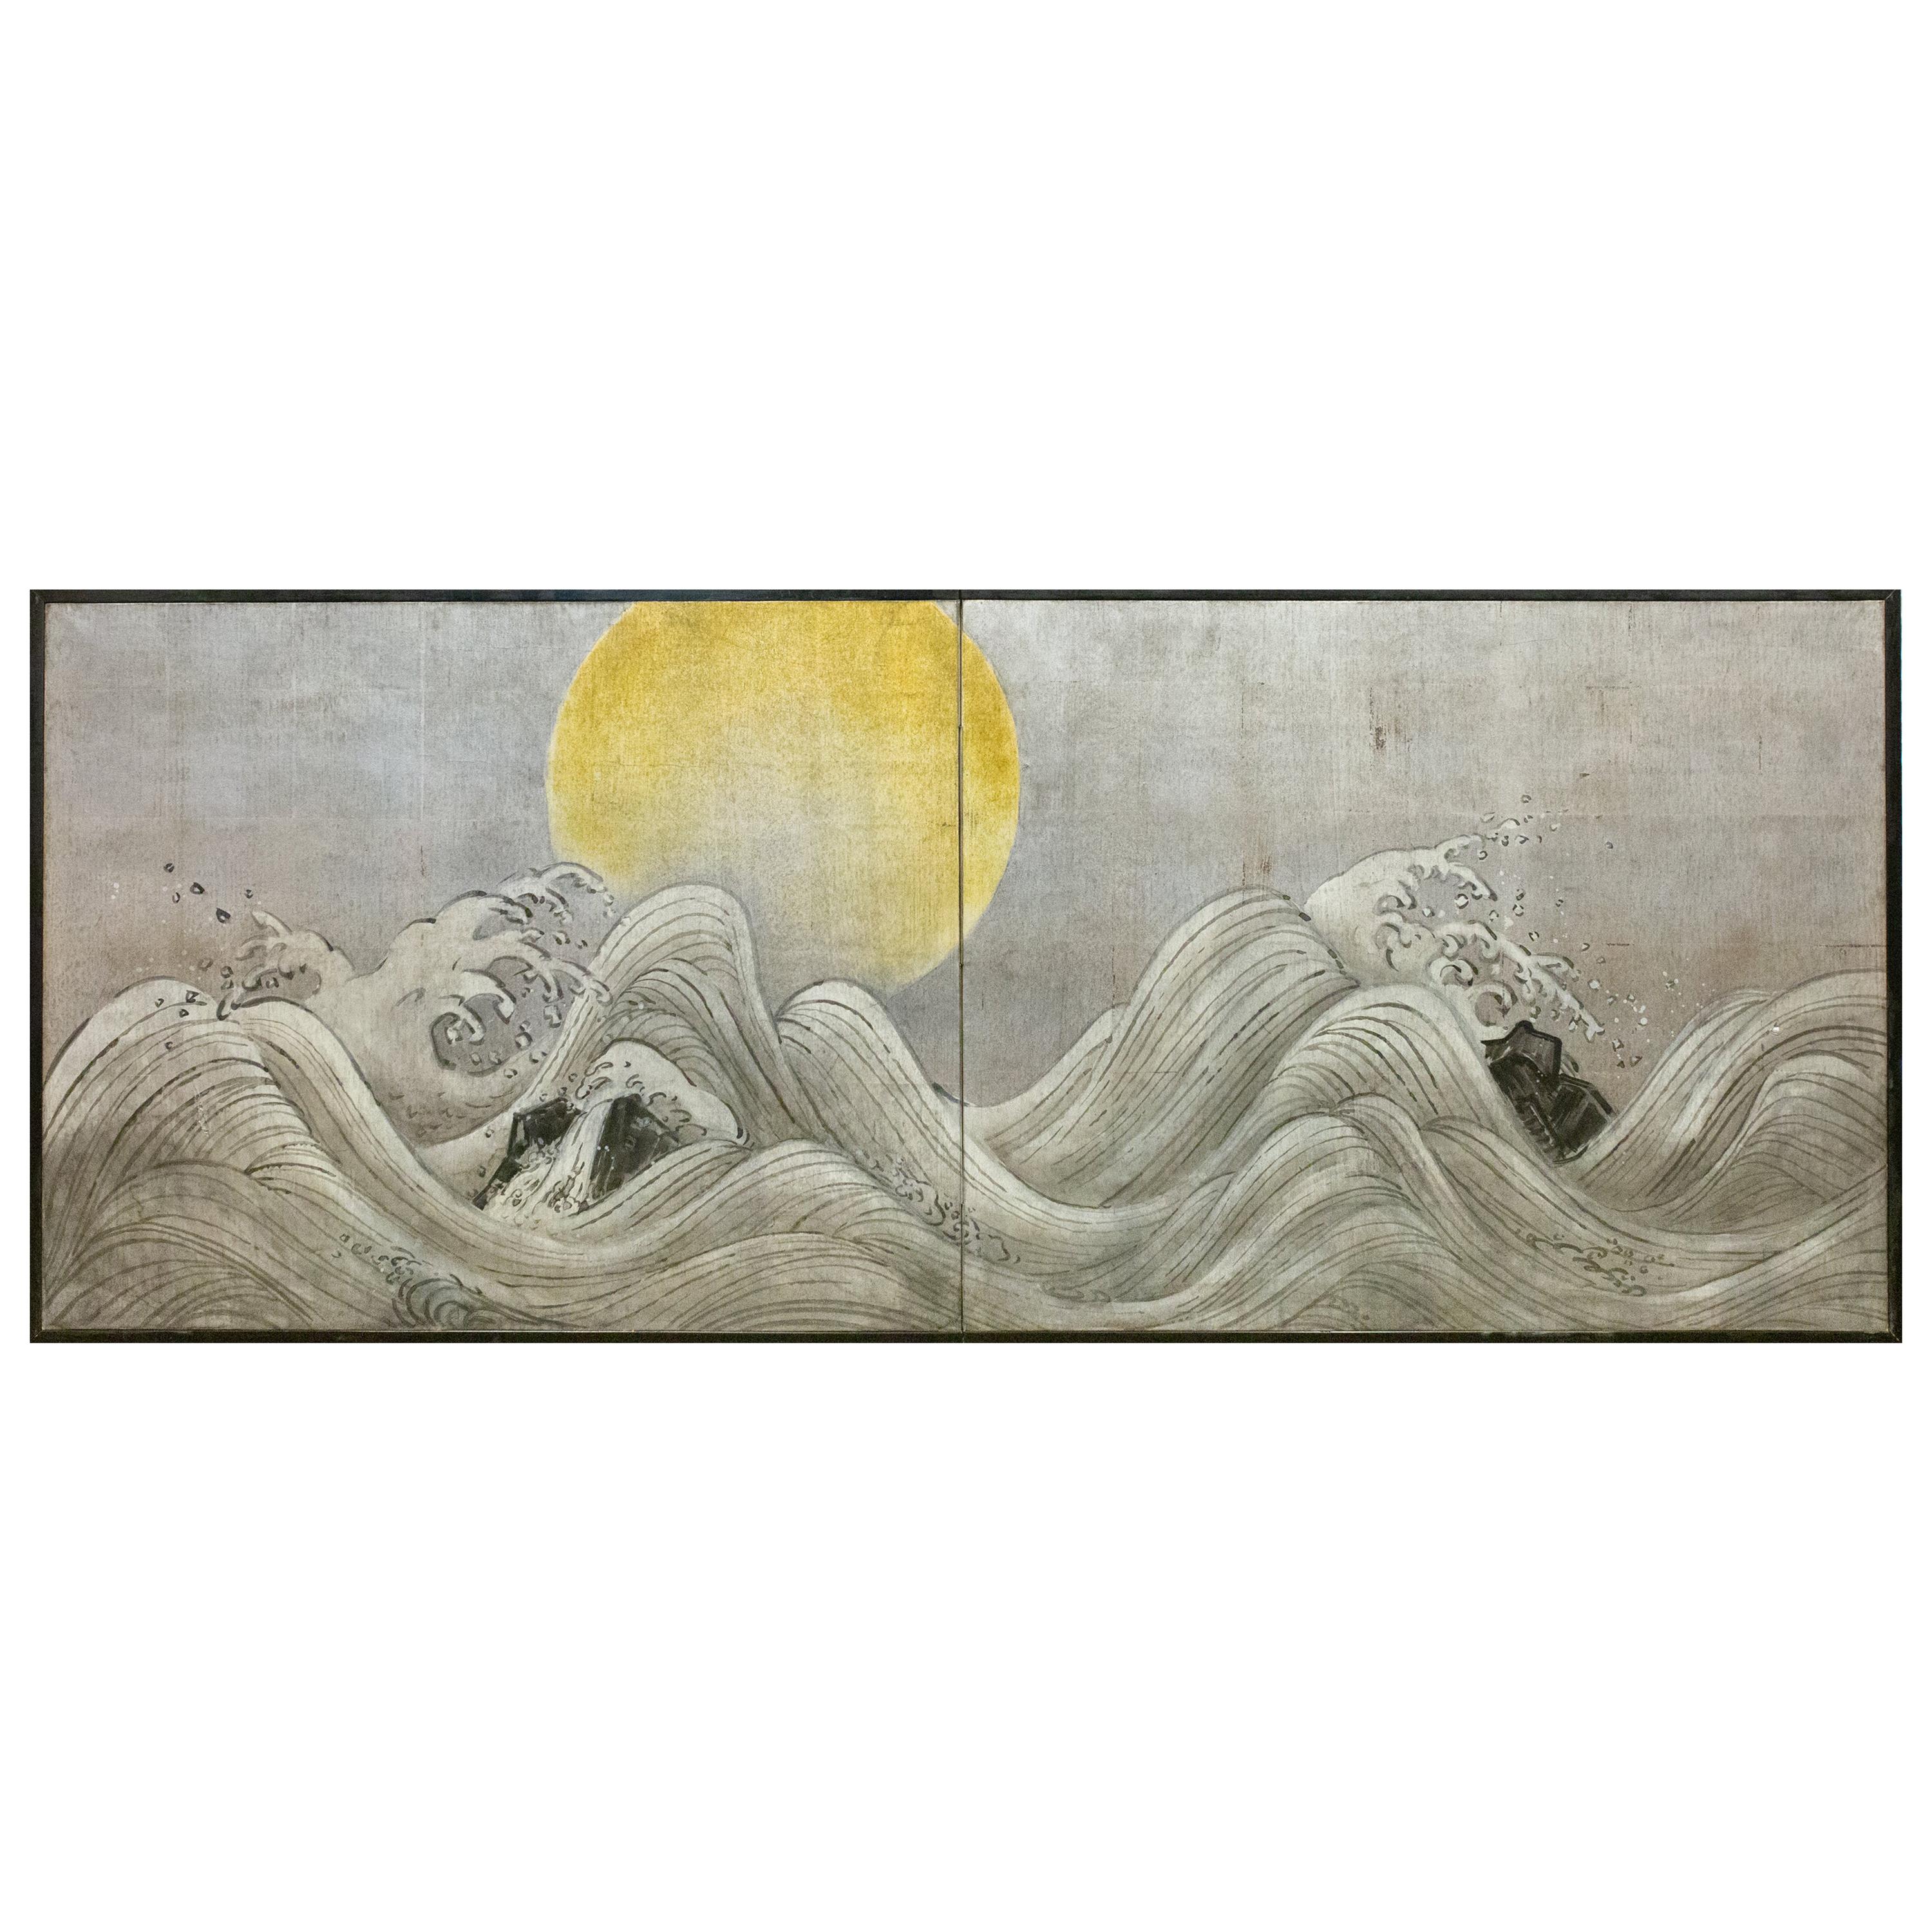 Japanese Two-Panel Screen Stylized Waves on Silver Leaf and Golden Sun